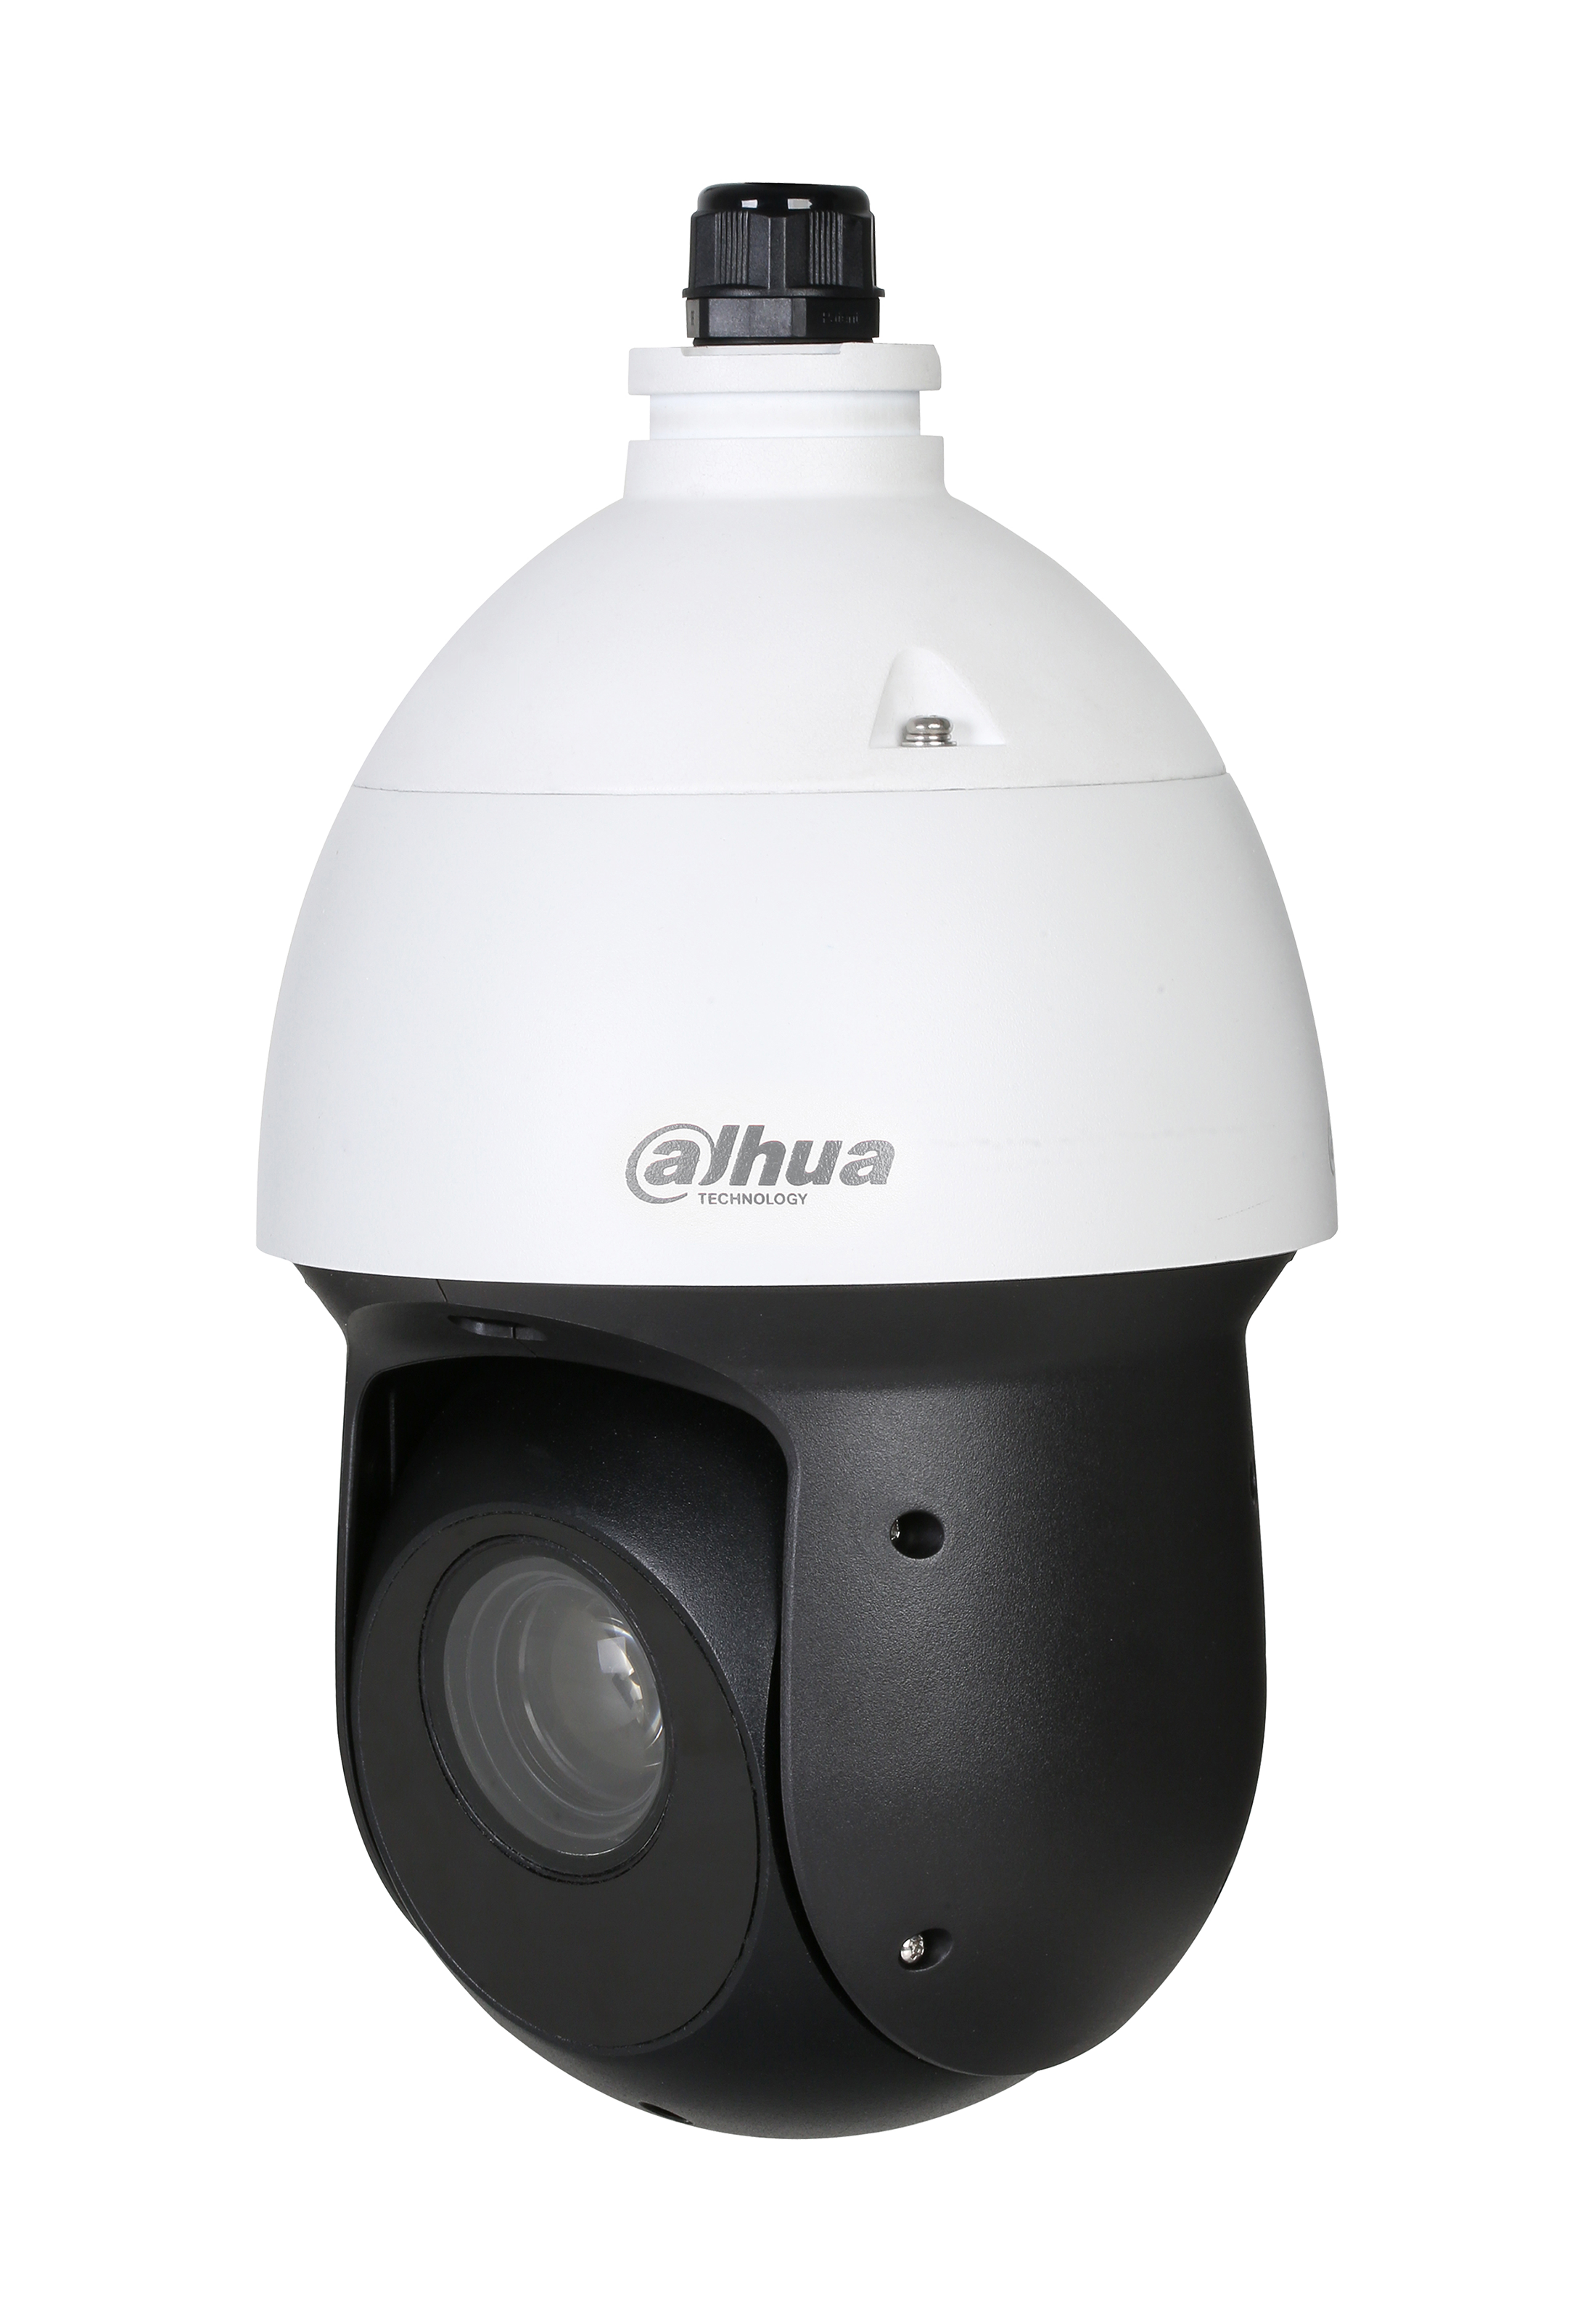 HDCVI SERIES HDCVI CAMERA WHITE 2MP/1080P SPEED DOME PTZ 120 WDR METAL 4.8-120MMMOTORISED LENS 25X ZOOM STARLIGHT IR 100M IP66 WITHOUT MIC AUDIO IN NO-SD CARD SLOT 12VDC CVBS OUTPUT